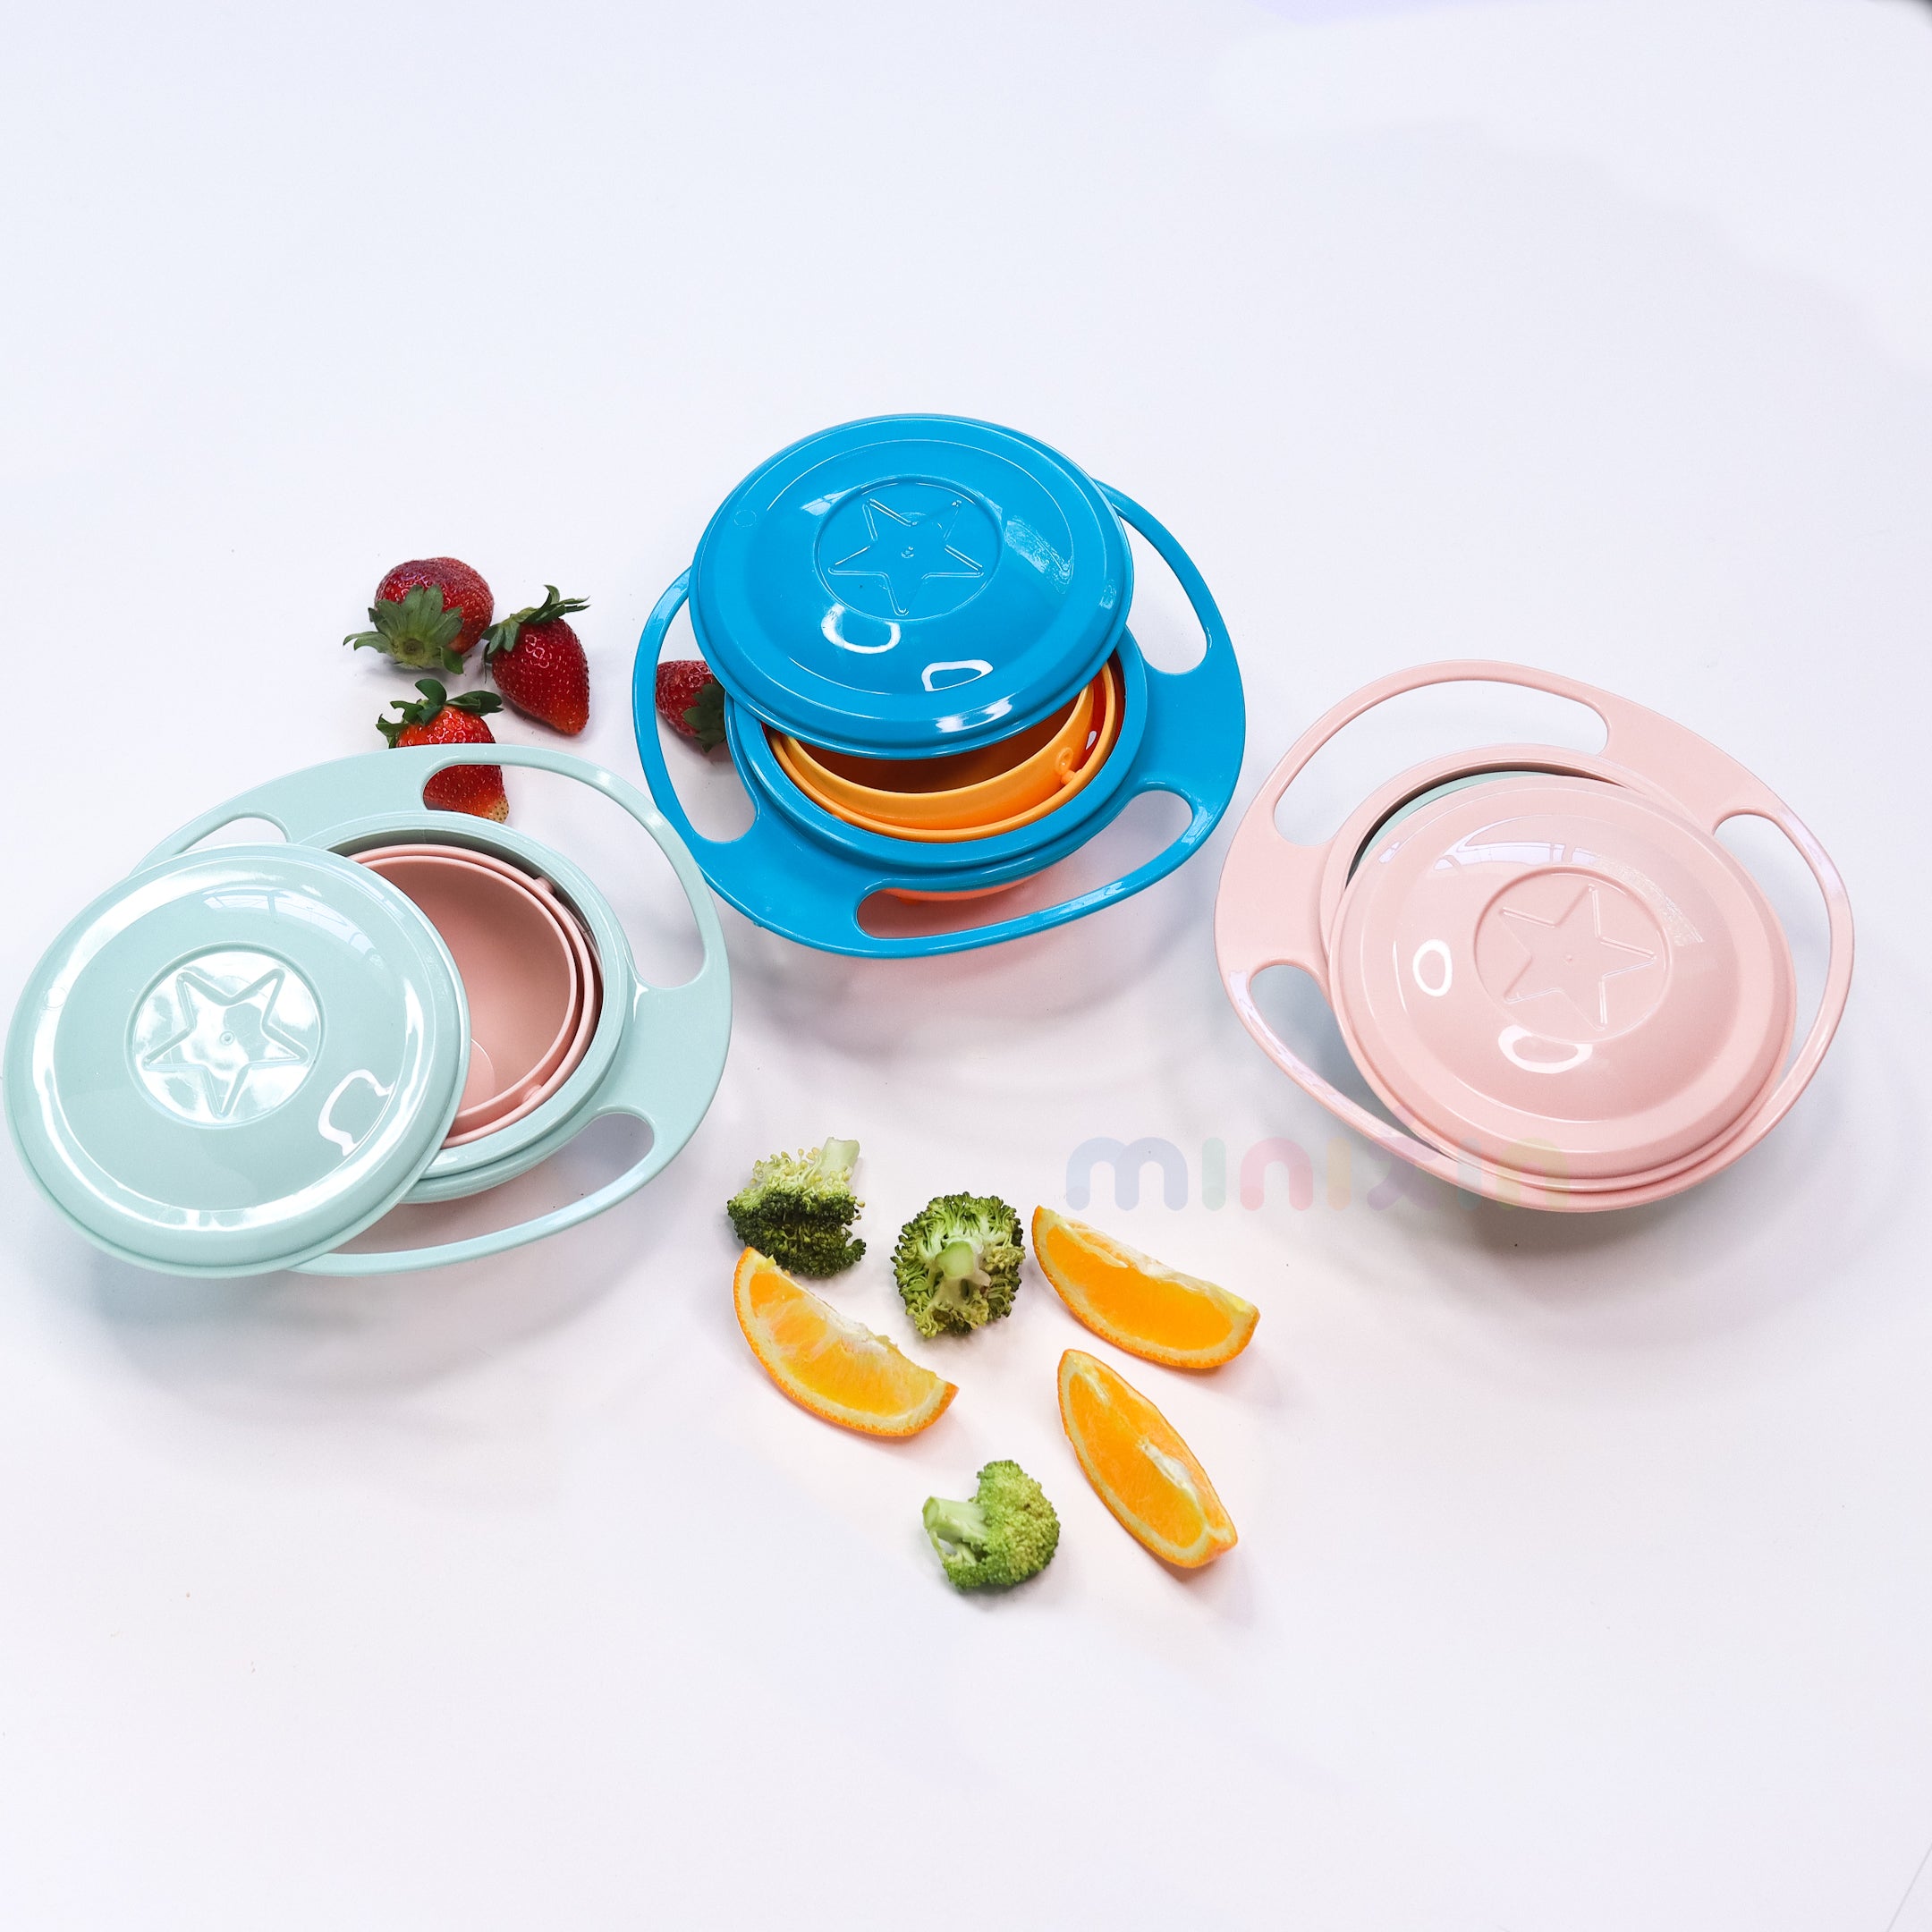 High Quality American Safety Standard Spill Proof 360 Degree Rotating Gyro Bowl With Lid - BPA Free